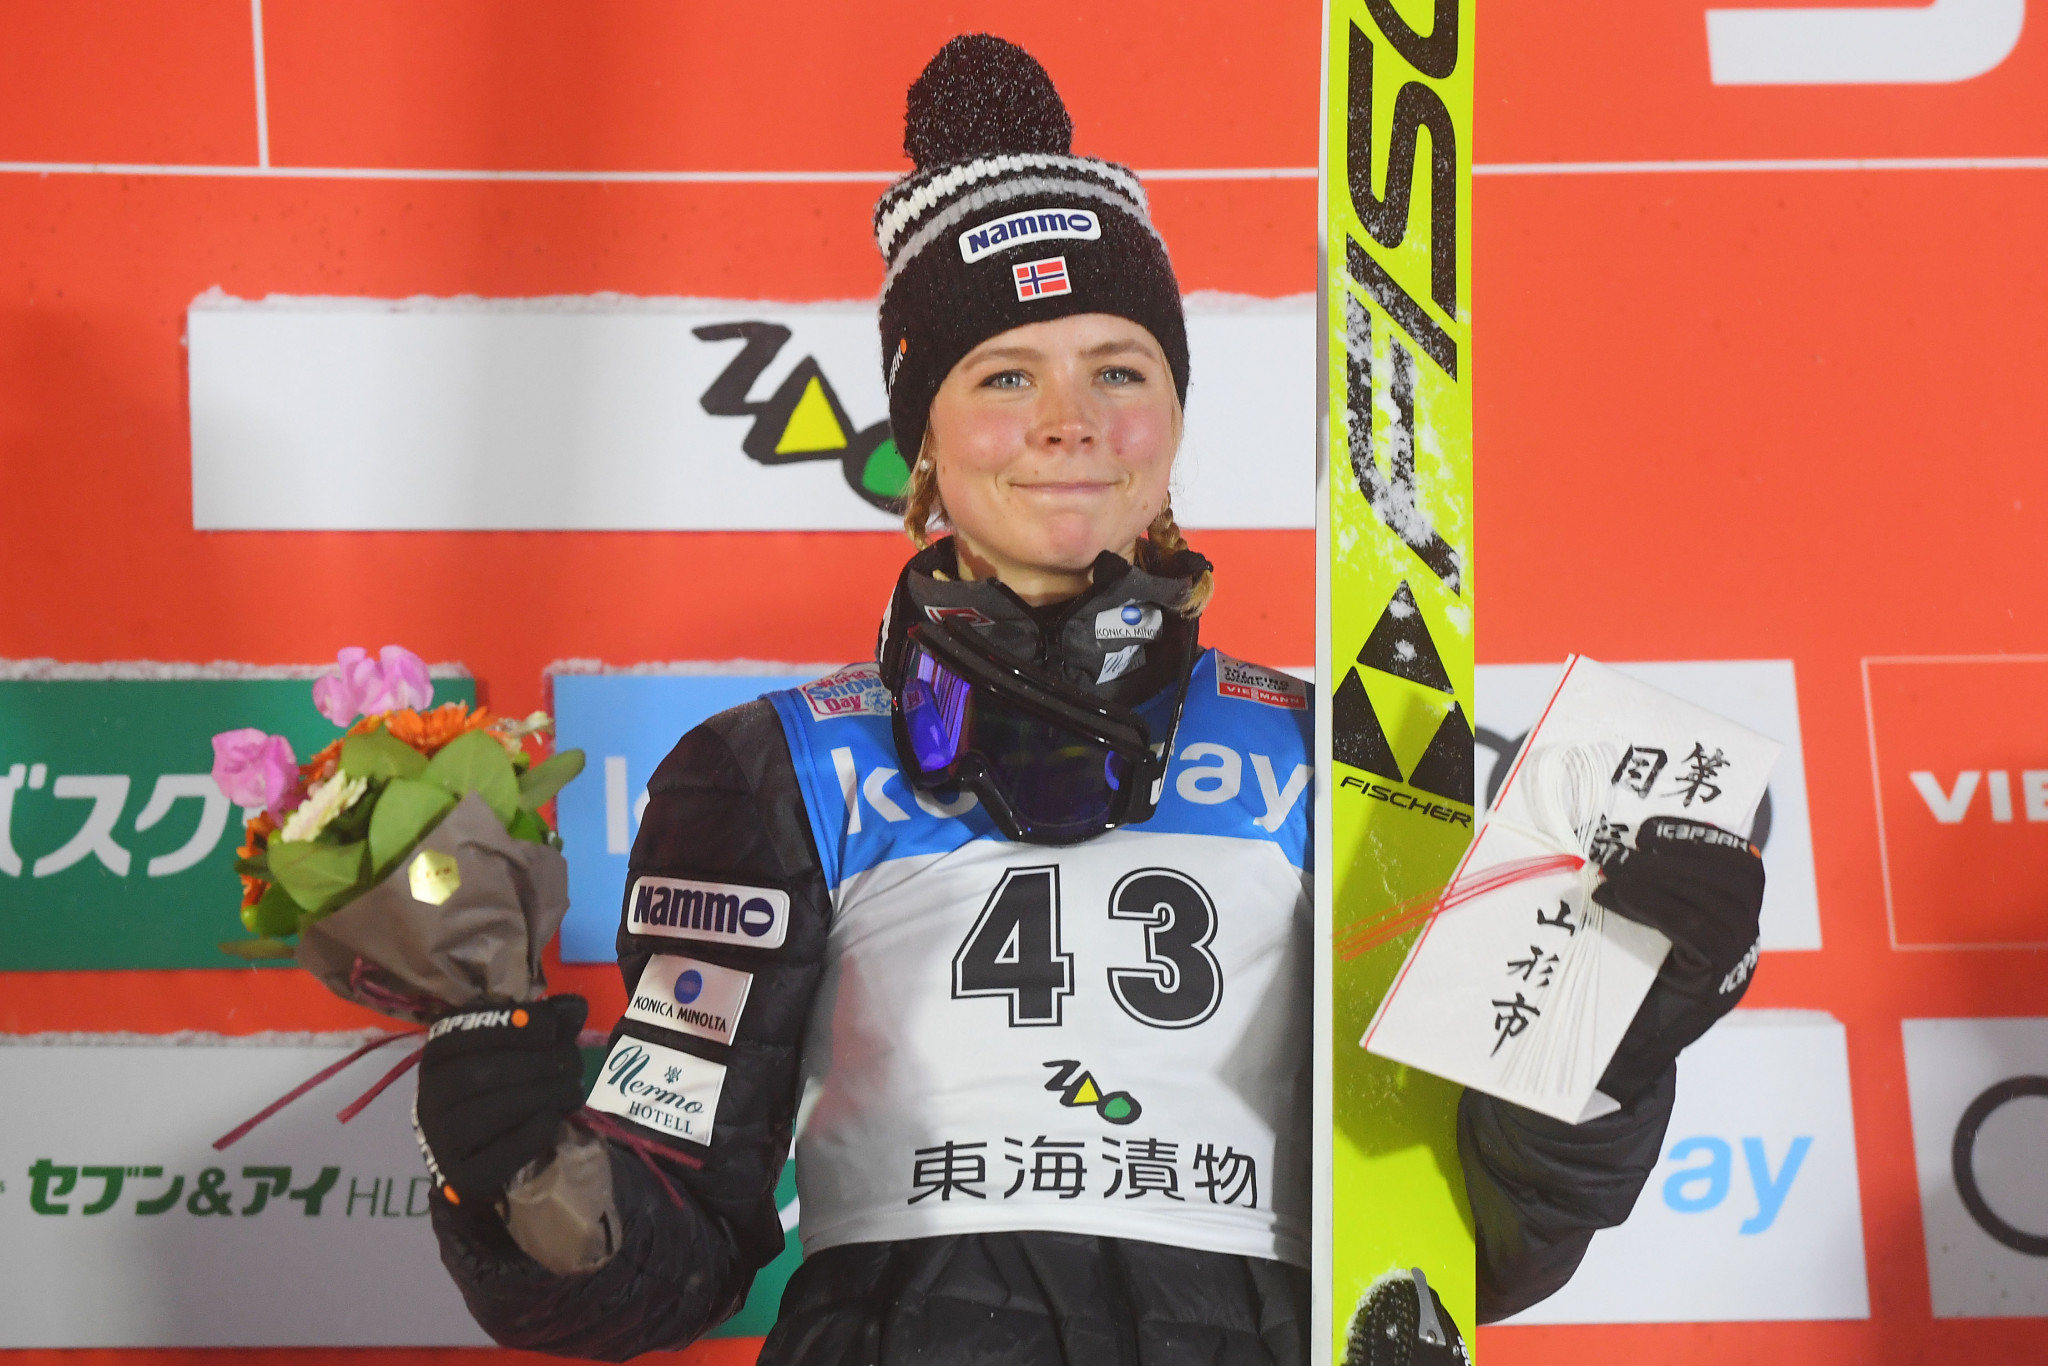 Olympic champion Lundby triumphs at FIS Ski Jumping World Cup event in Zao